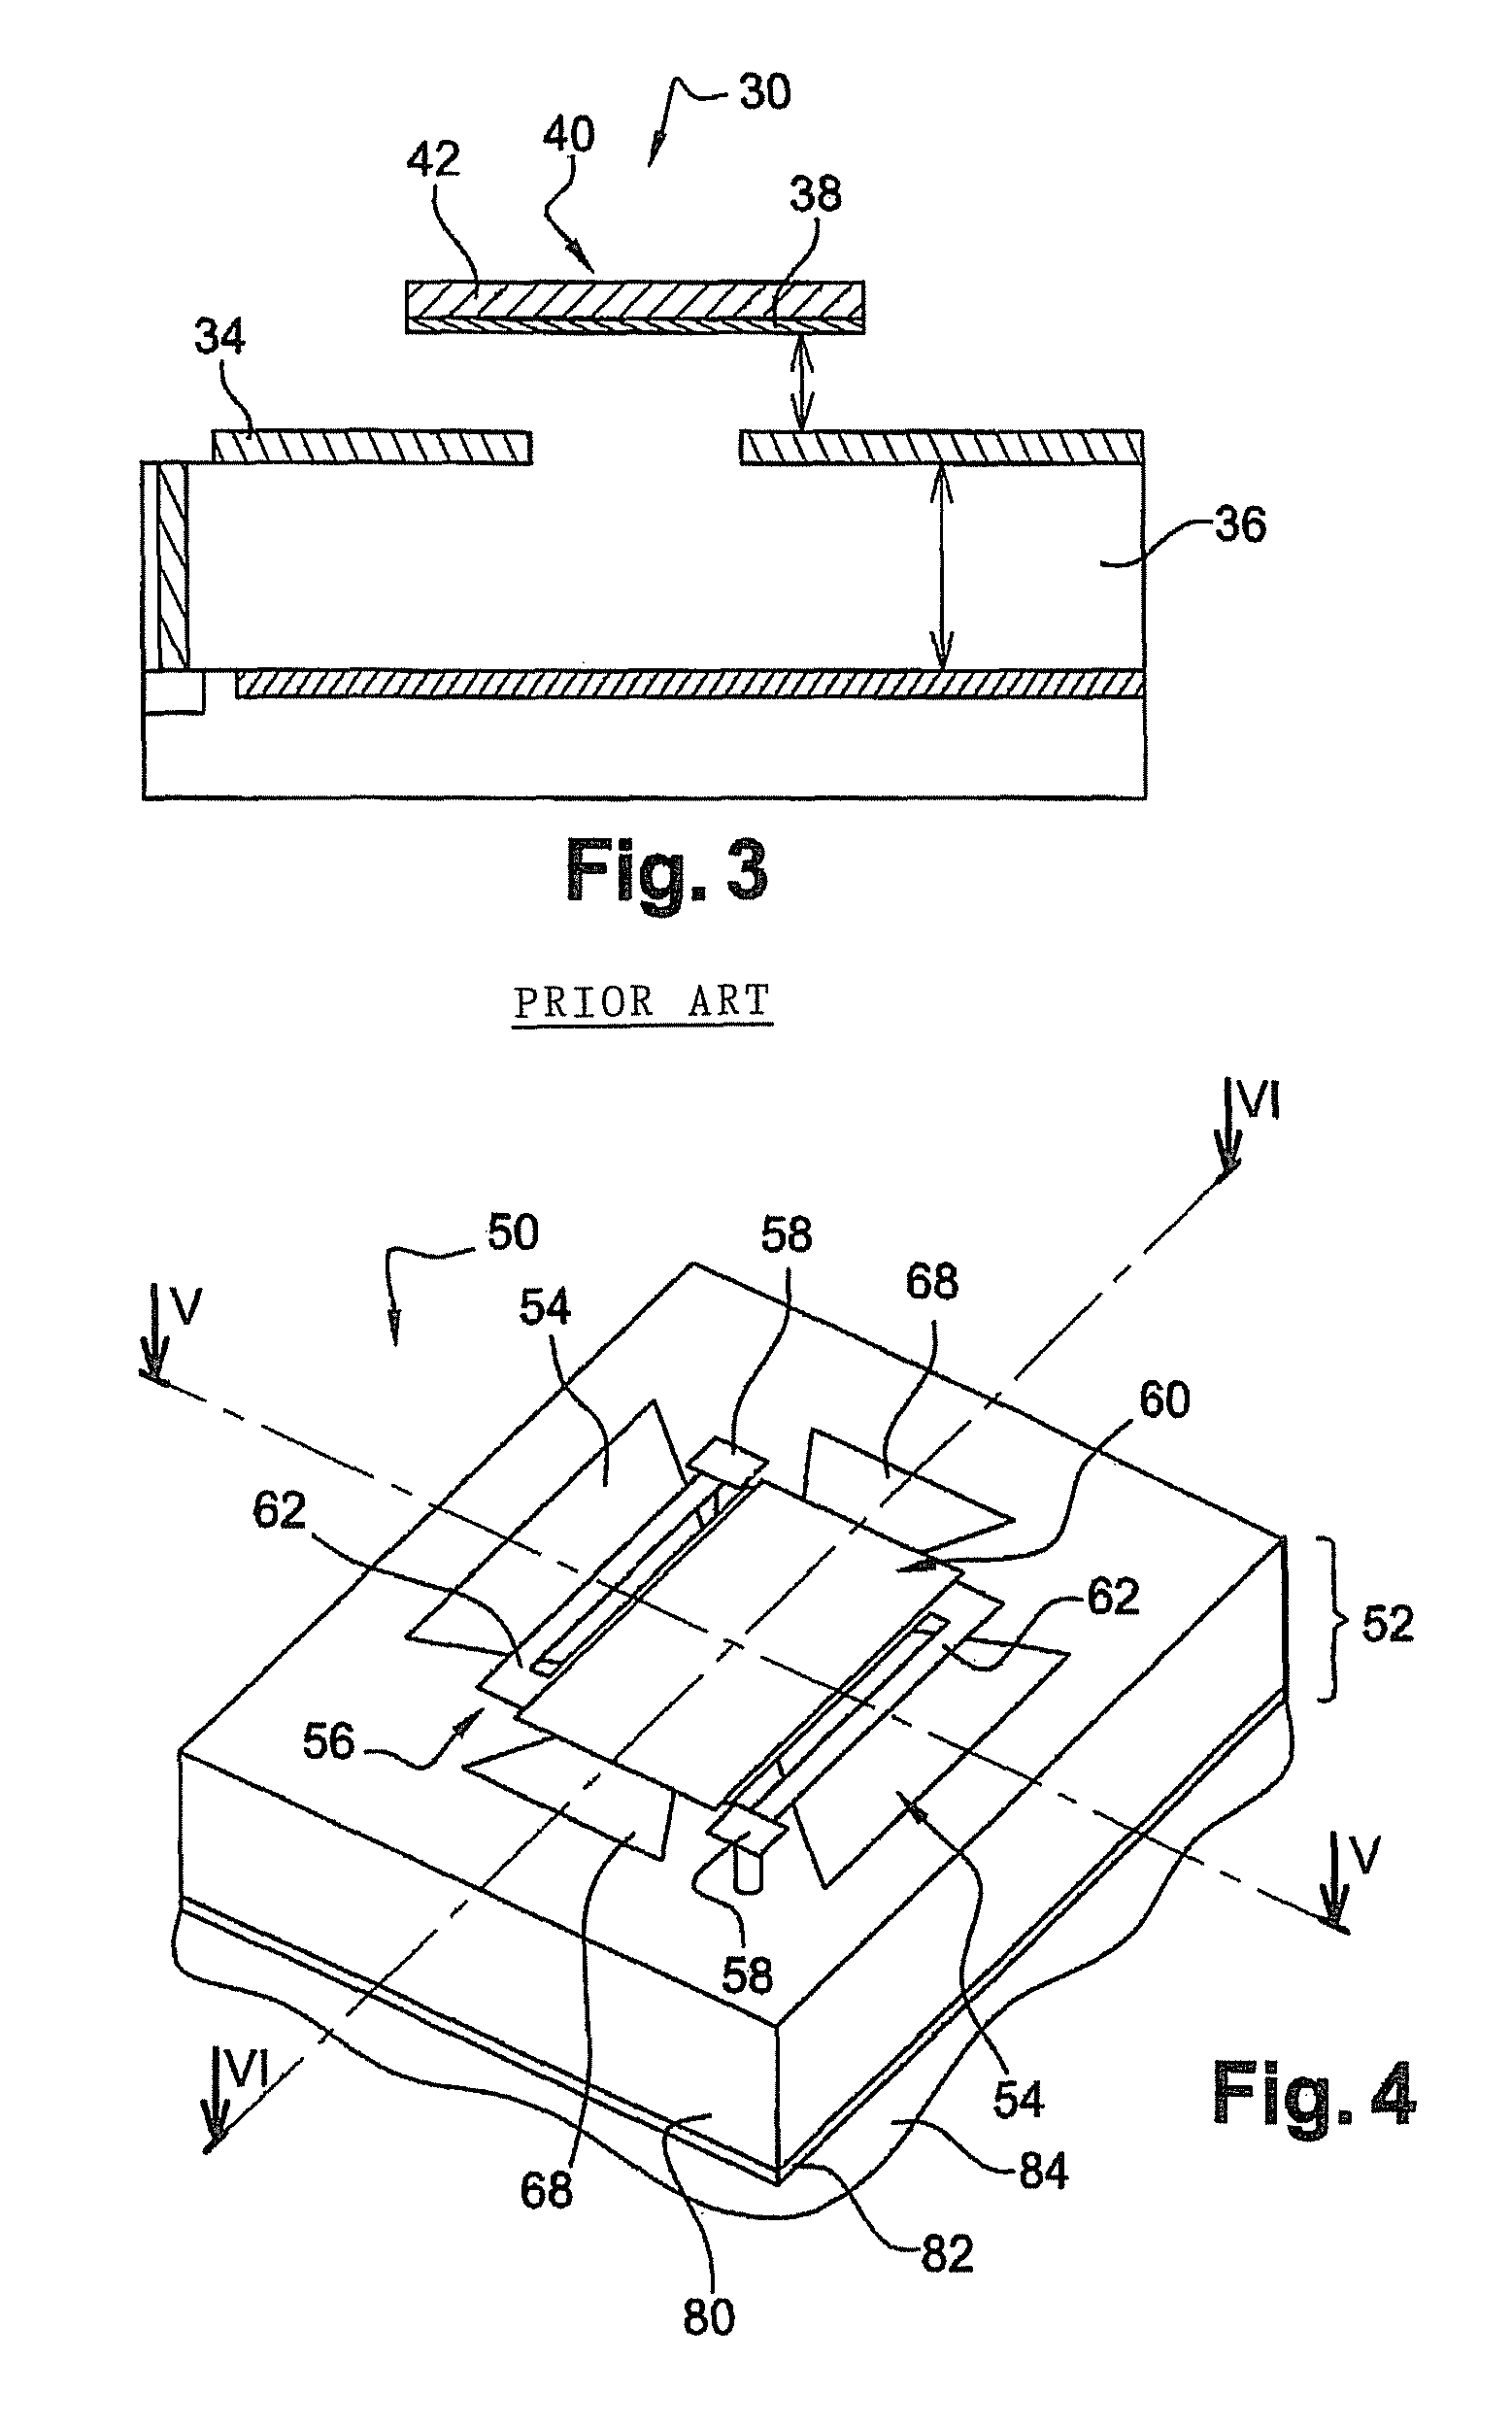 Bolometric detector for detecting electromagnetic radiation in the region extending from infrared to terahertz frequencies and an array detection device comprising such detectors